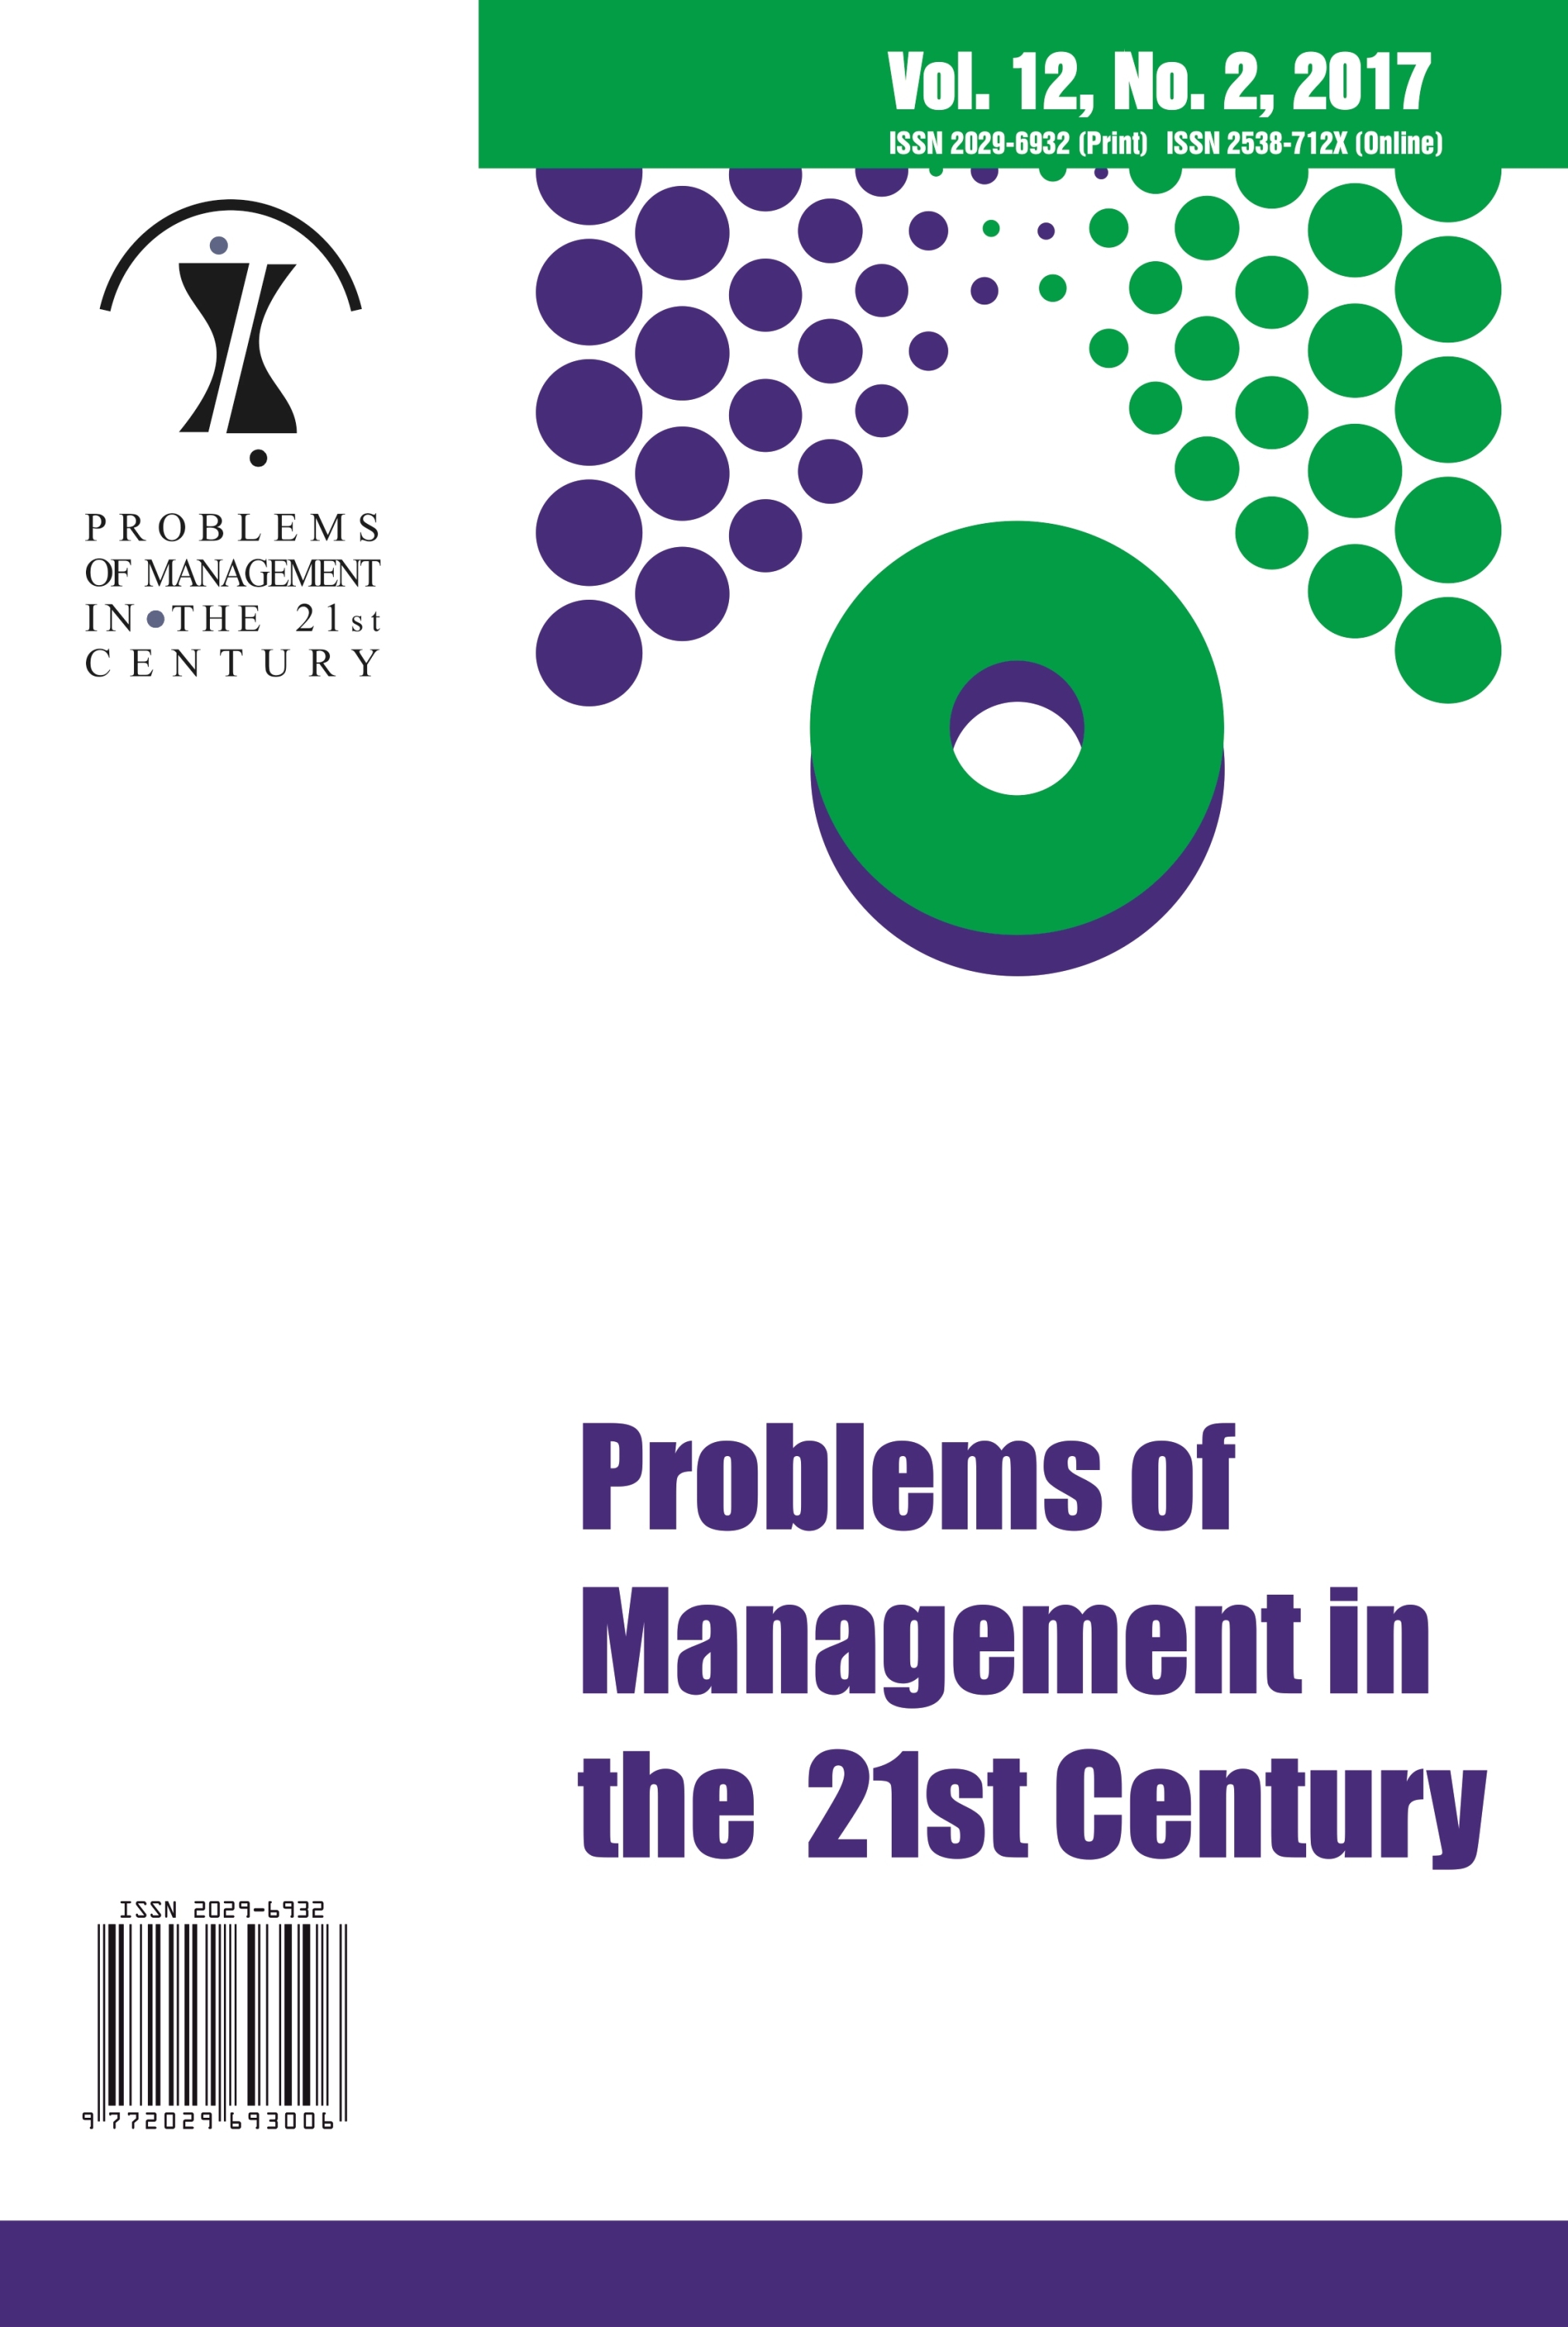 THE EVOLUTION OF RISK MANAGEMENT RESEARCH: CHANGES IN KNOWLEDGE MAPS Cover Image